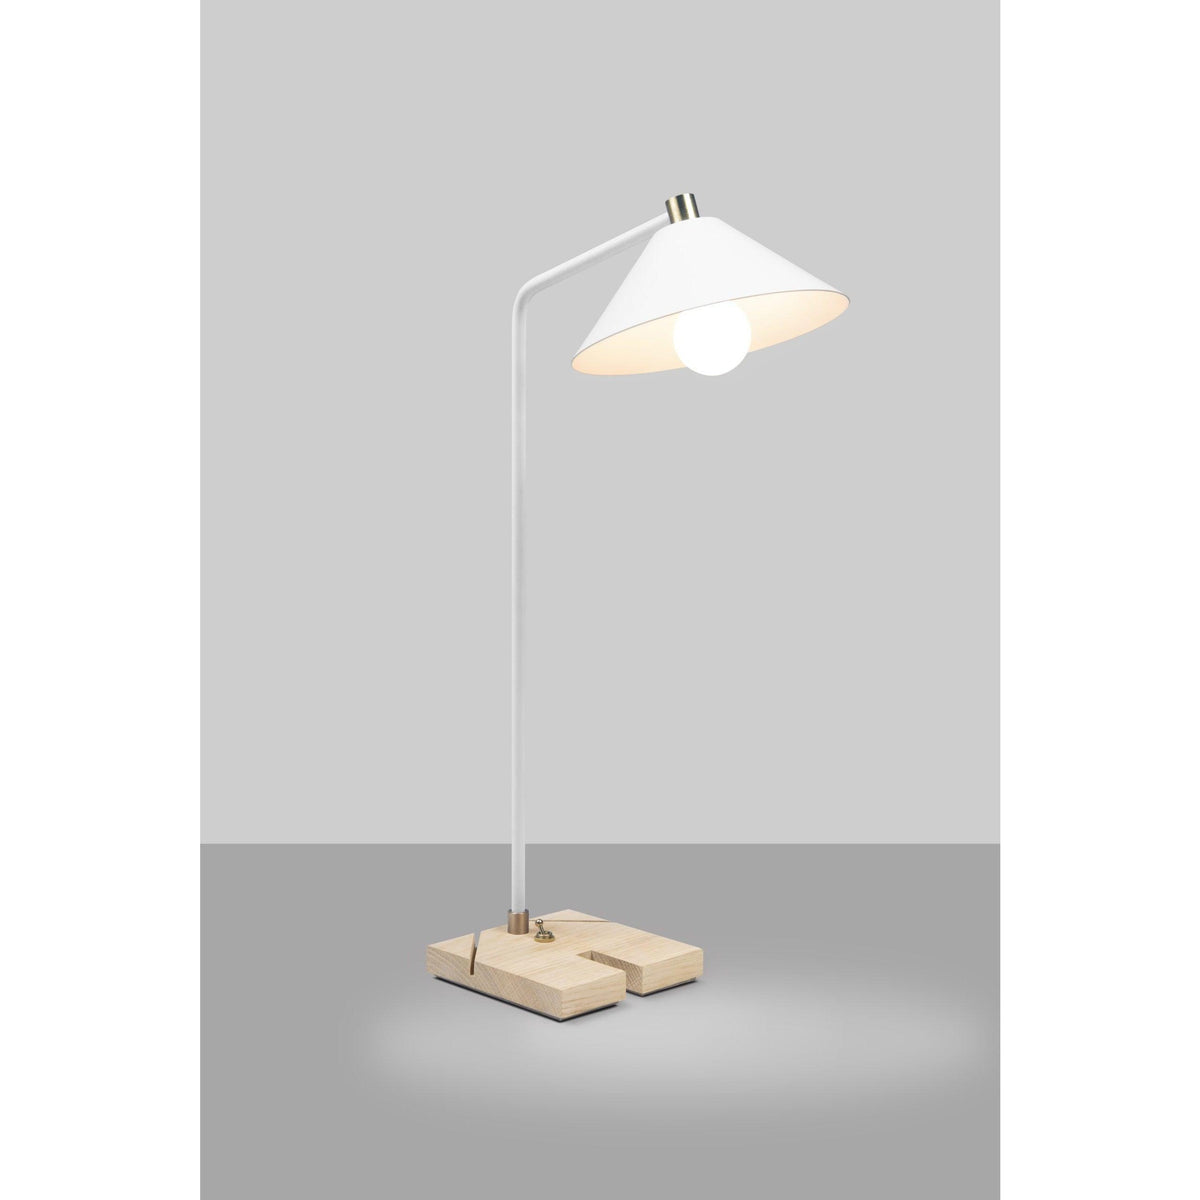 Cerno - Adesse LED Table Lamp - 02-170-WO | Montreal Lighting & Hardware